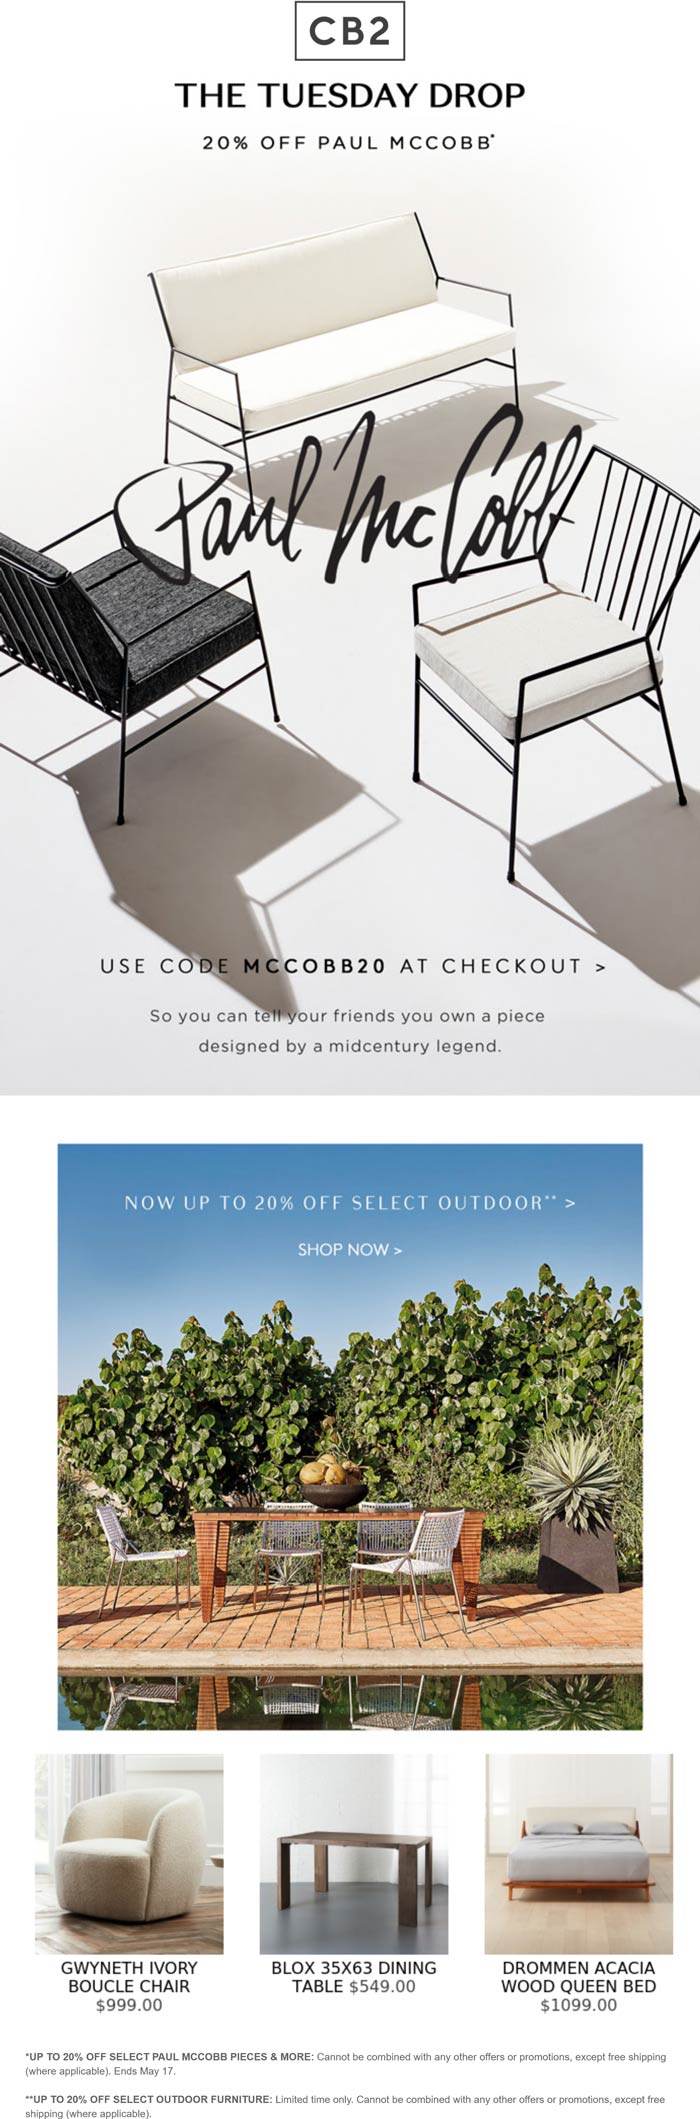 CB2 stores Coupon  20% off outdoor furniture & more today at Crate & Barrel CB2 #cb2 